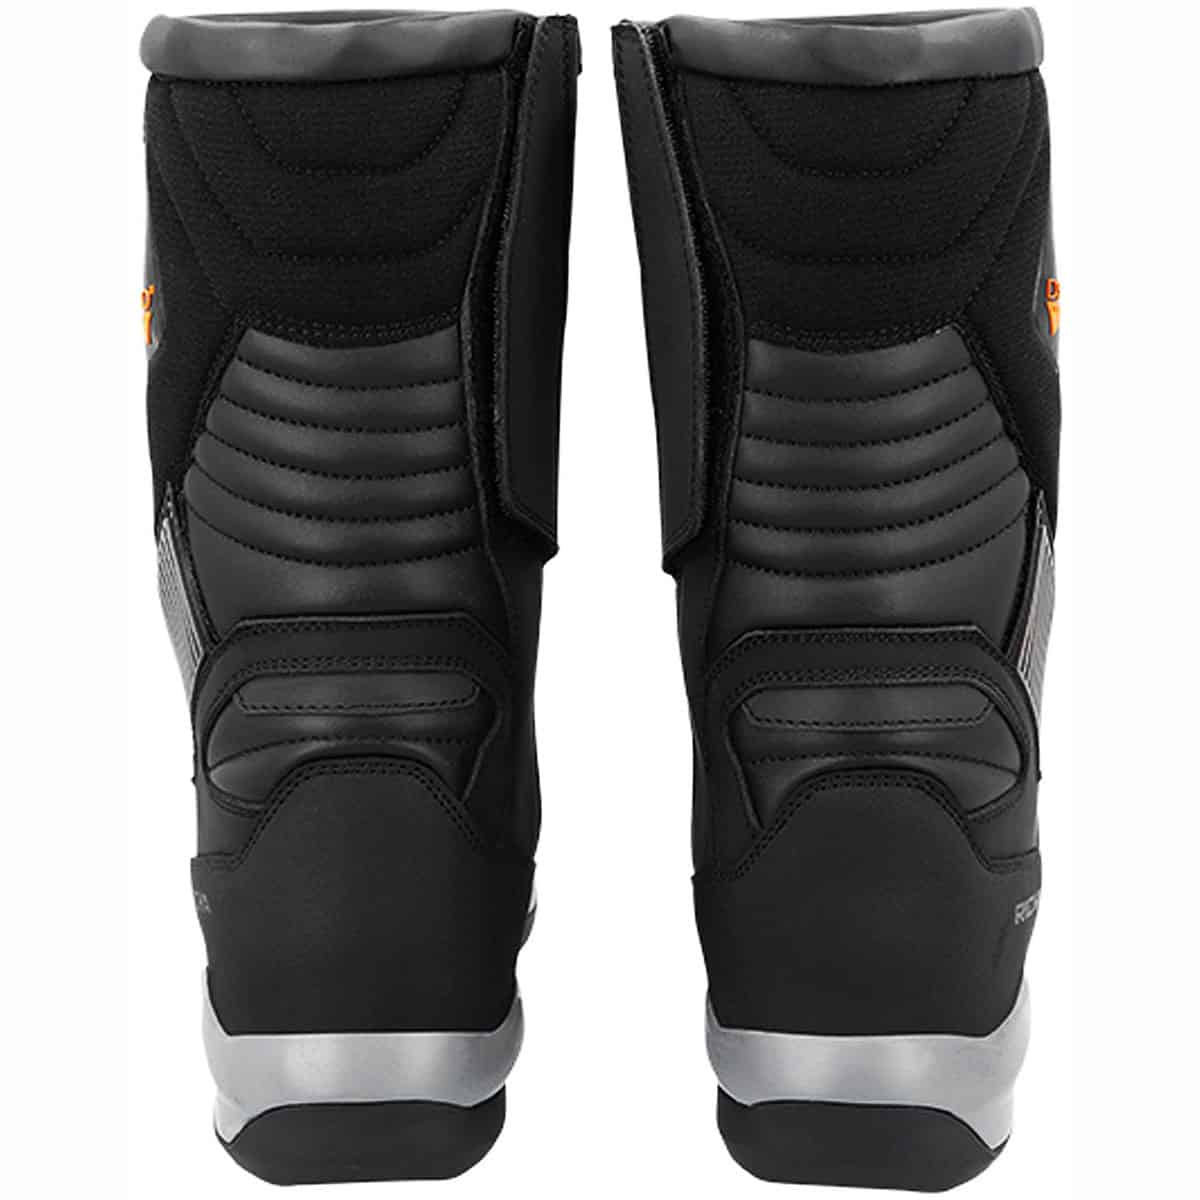 Richa waterproof touring boots with Ortholite sole for superior comfort off the 'bike - back